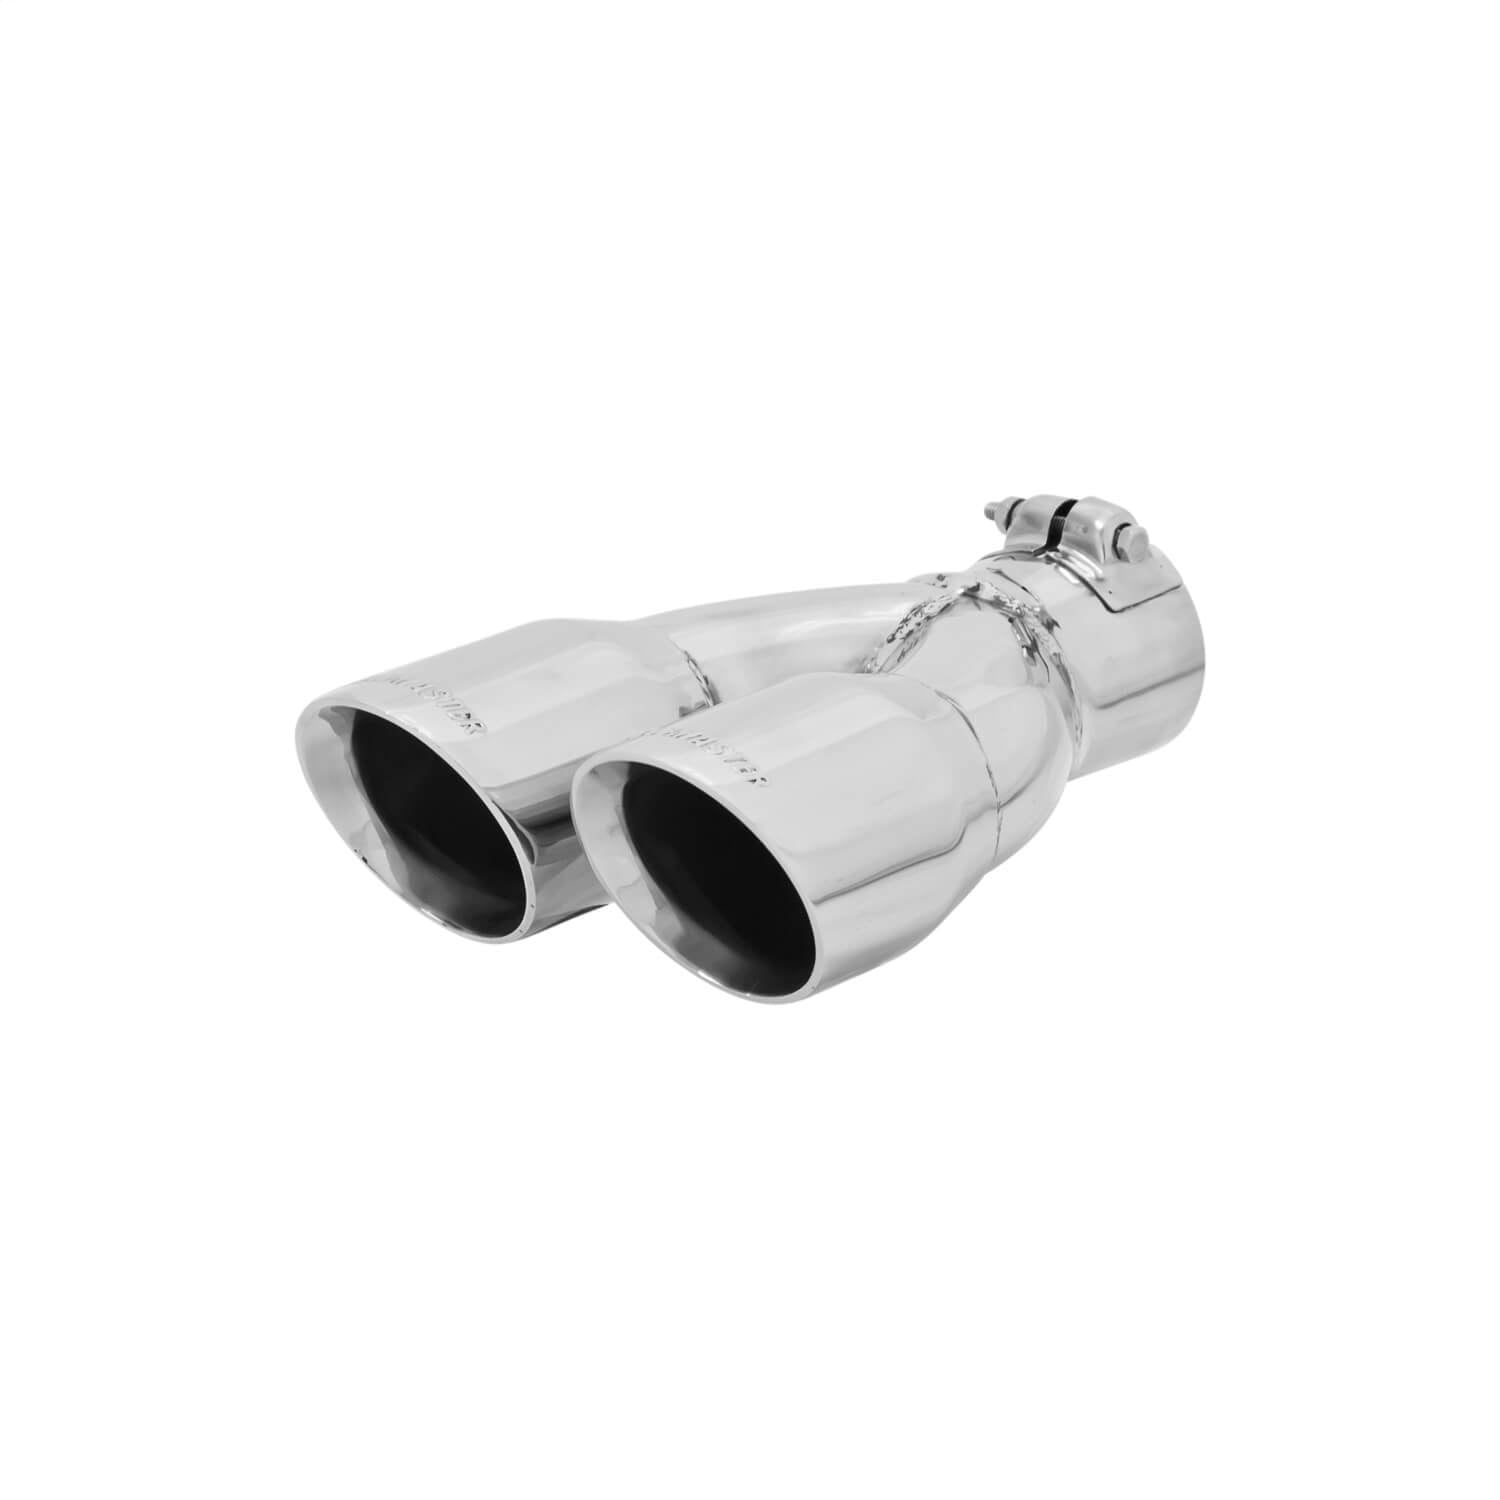 Flowmaster 15391 4.00 Polished Stainless Steel Dual Angle Cut Exhaust Tip 